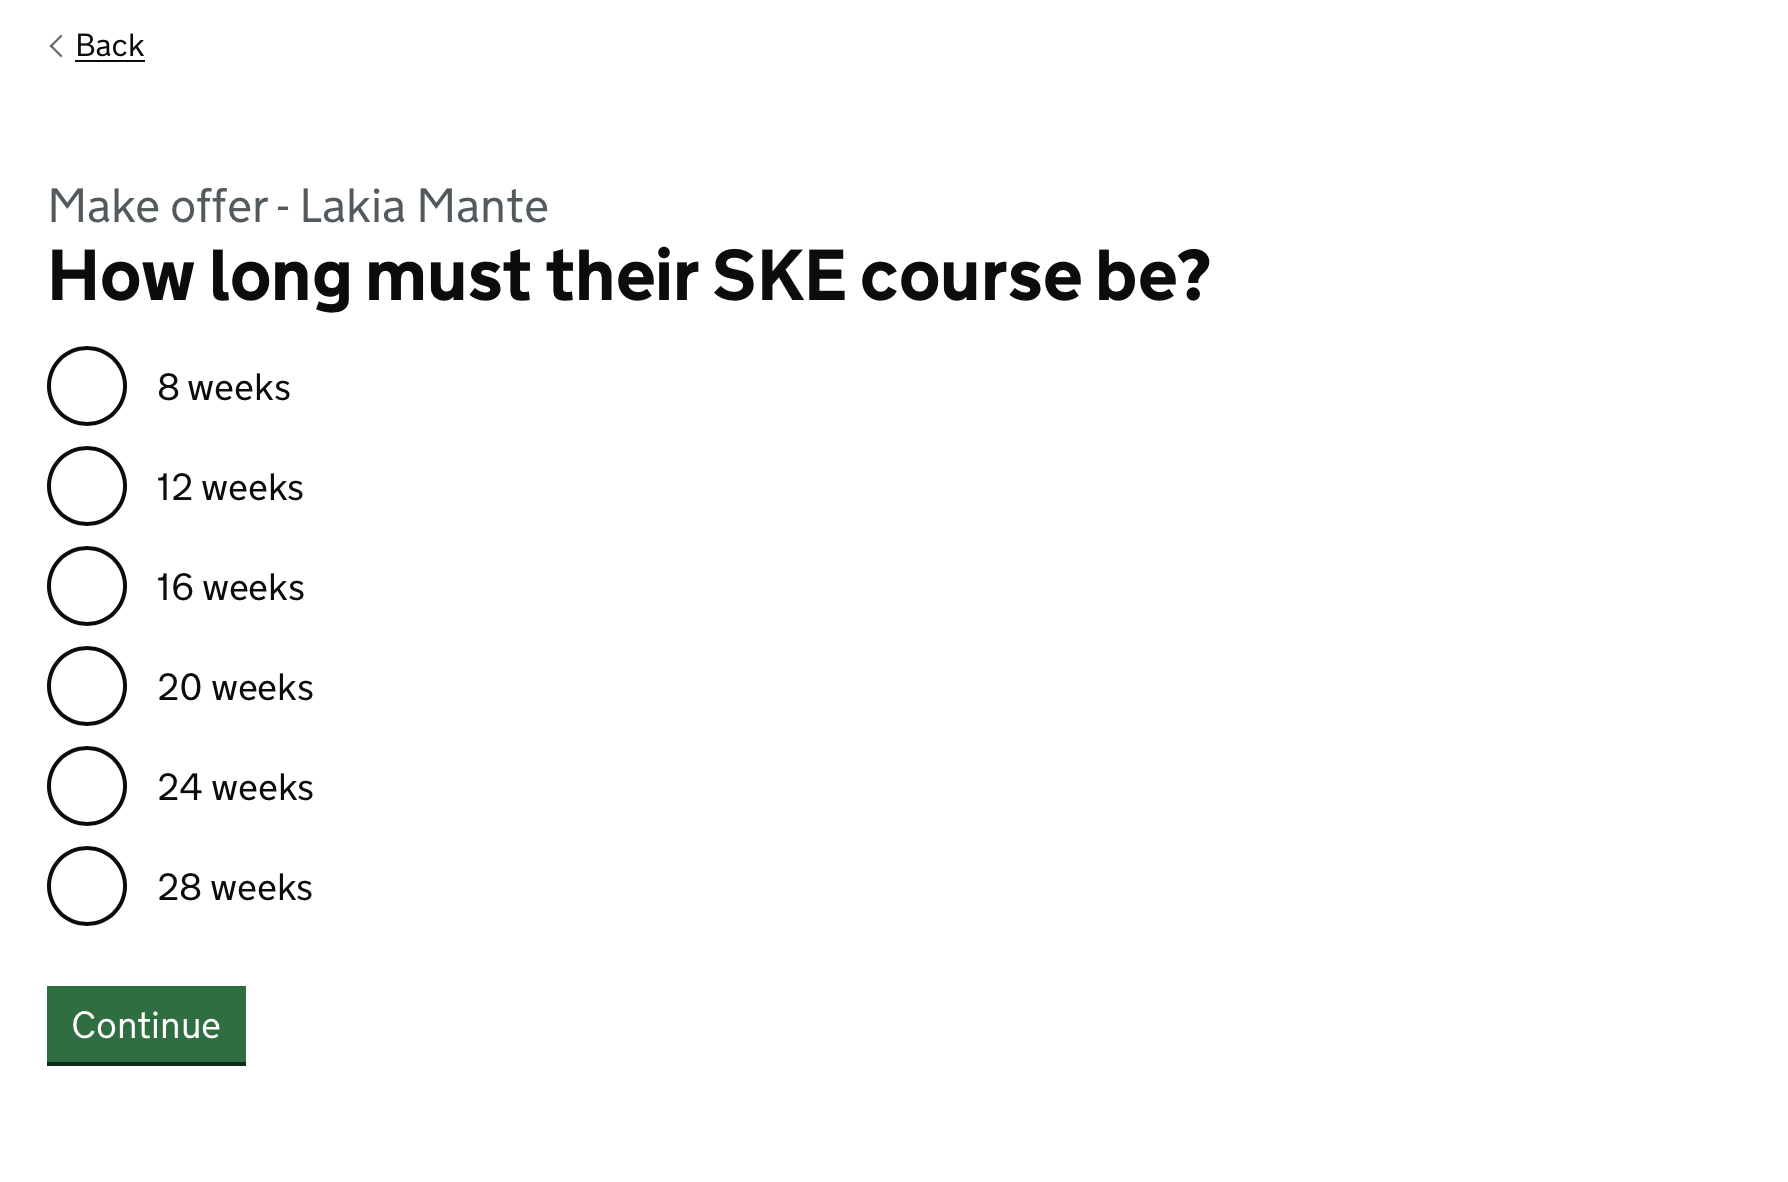 Screenshot with the heading ‘How long must their SKE course be?’ with radio button answers for 8 weeks, 12 weeks, 16 weeks, 20 weeks, 24 weeks and 28 weeks.